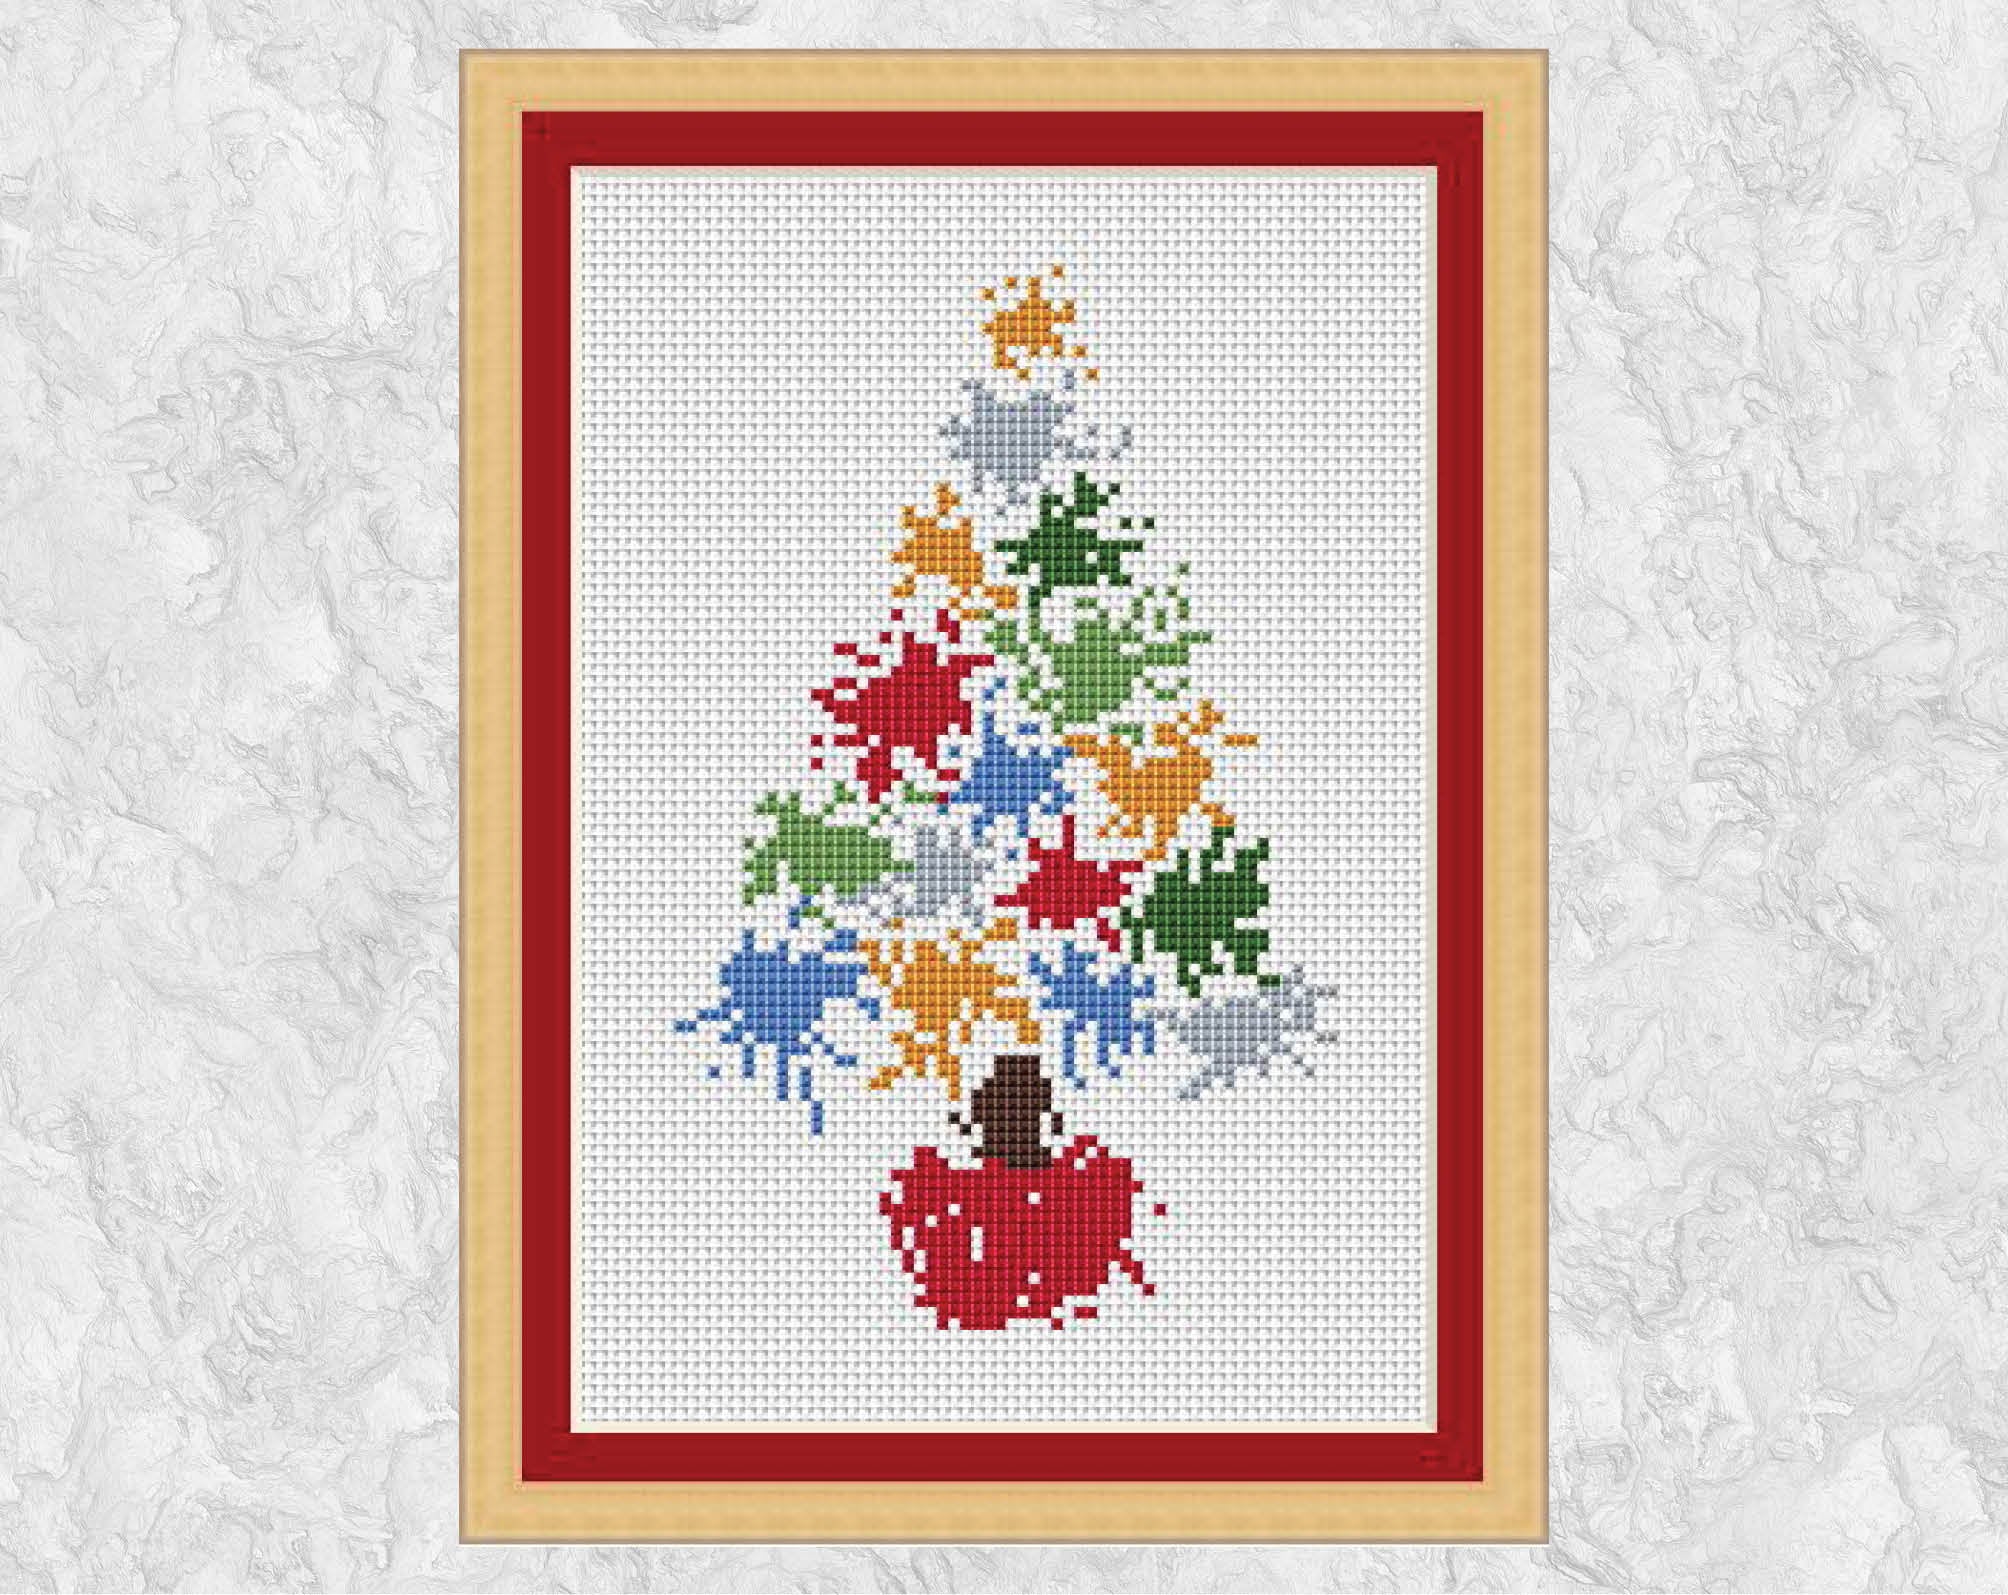 Splattered Paint Christmas Tree cross stitch pattern with frame